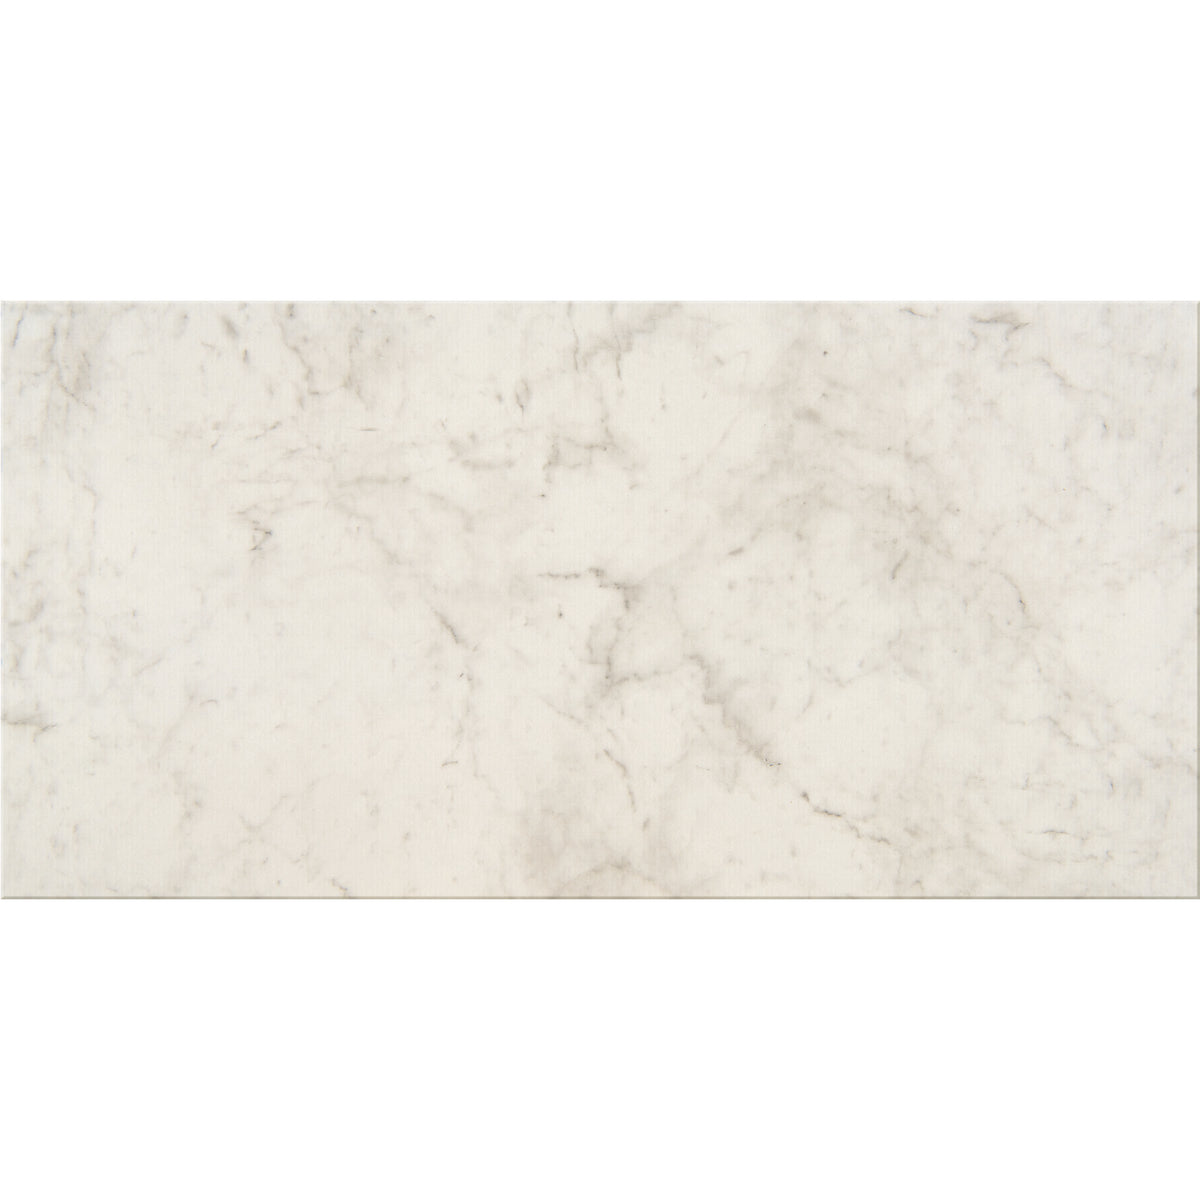 American Olean - Mythique Marble 12 in. x 24 in. Colorbody Porcelain Tile - Altissimo Matte